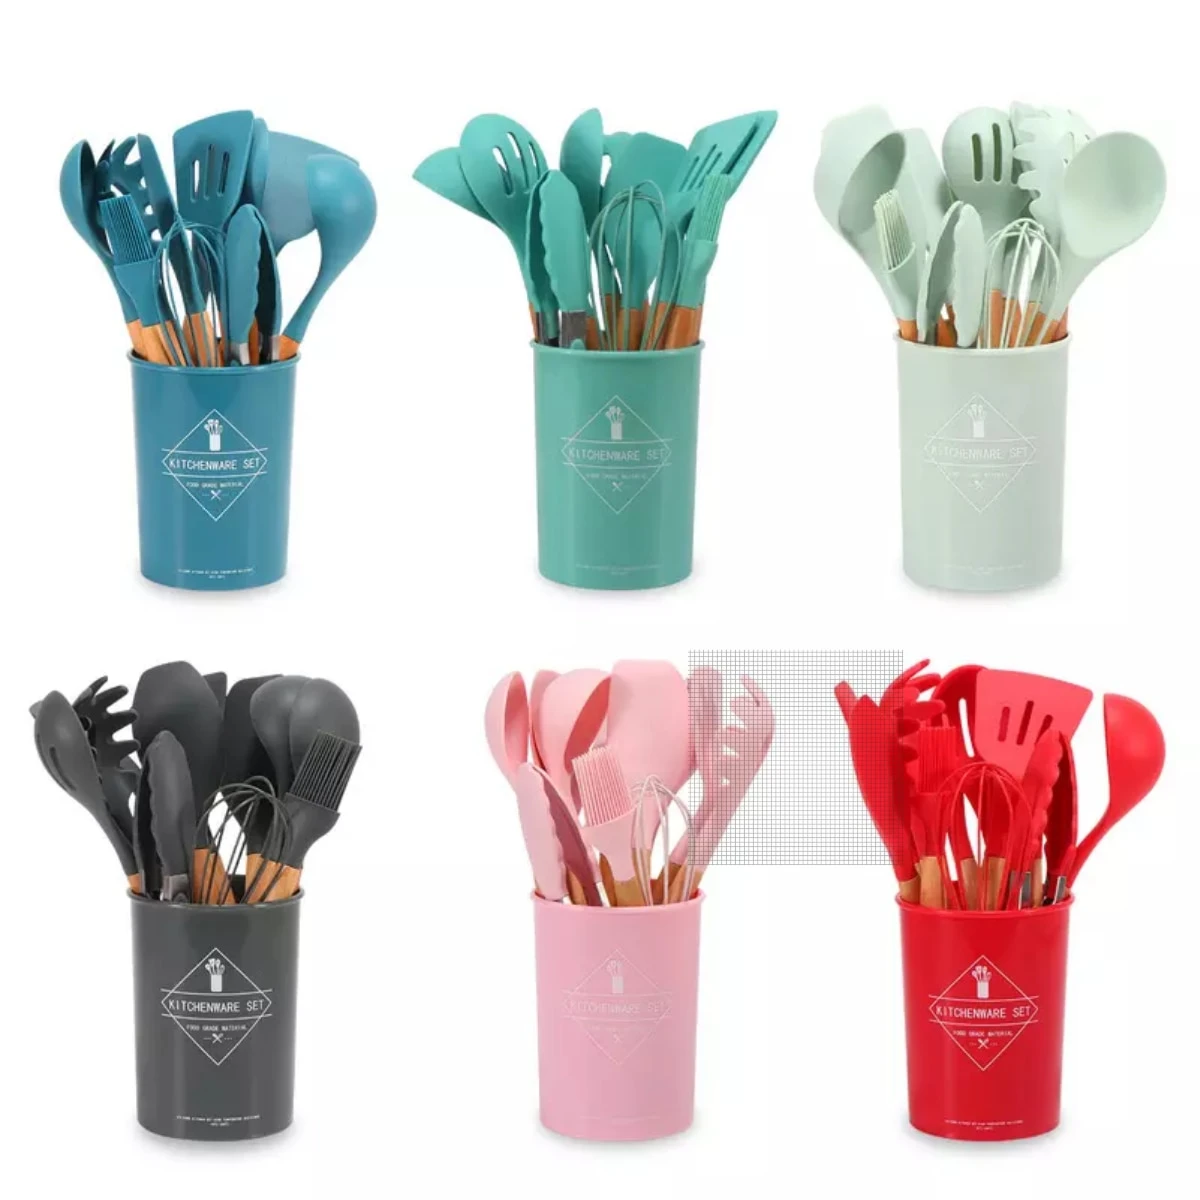 RAYBIN wholesale heat resist cooking tools 12pcs Silicone kitchen Utensils with wood handle